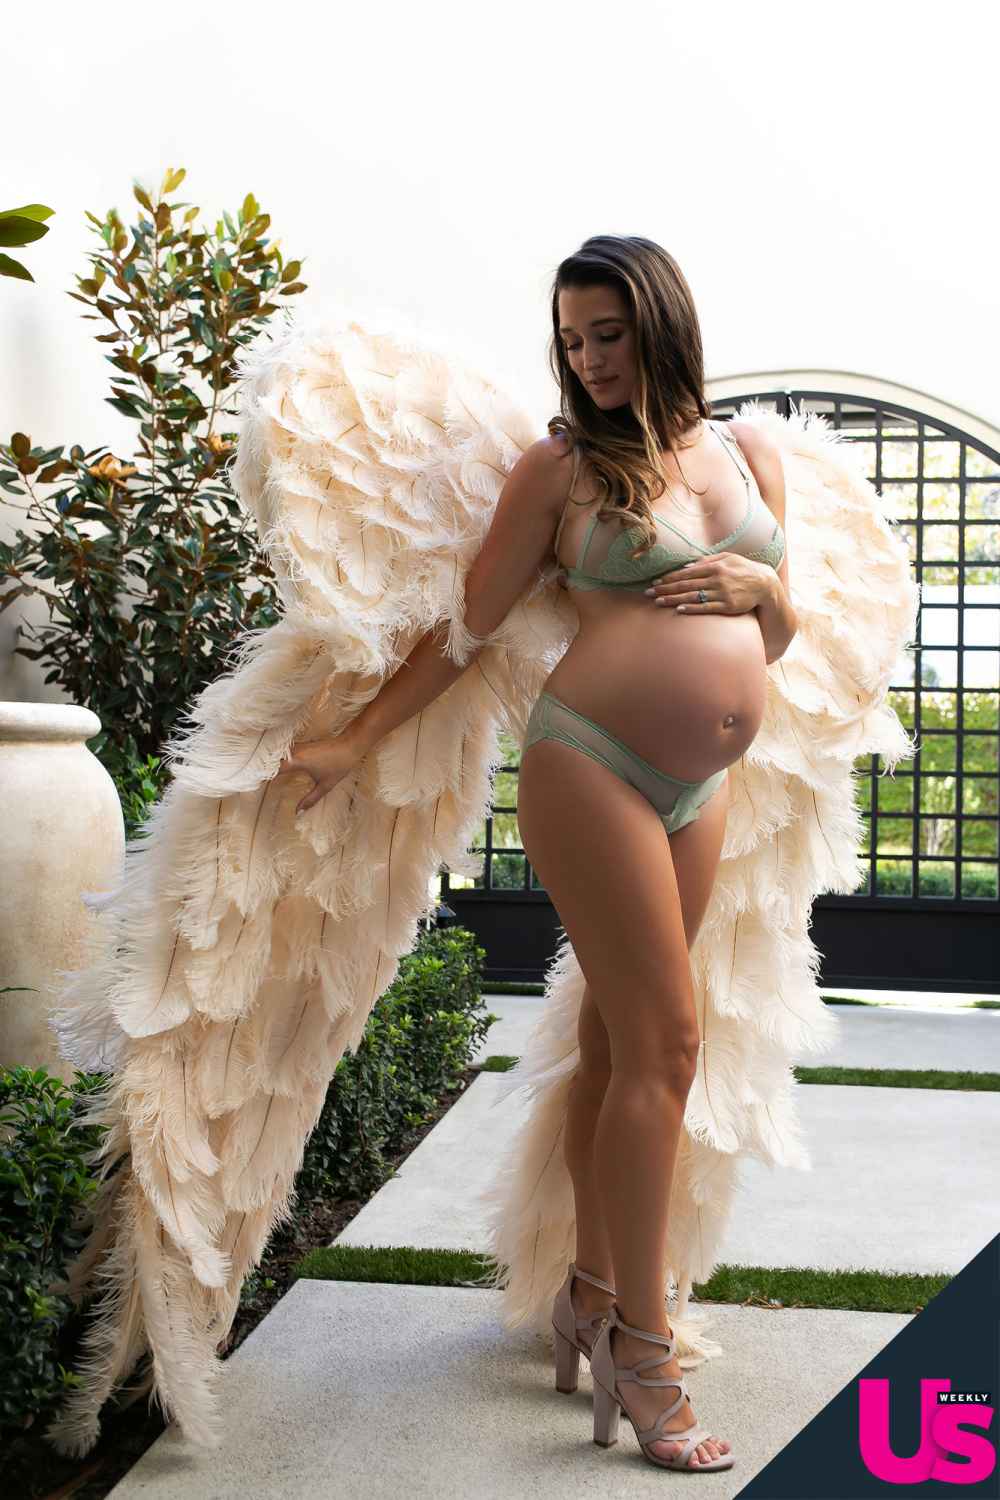 Pregnant Jade Roper Stuns in Maternity Pics Ahead of 3rd Baby